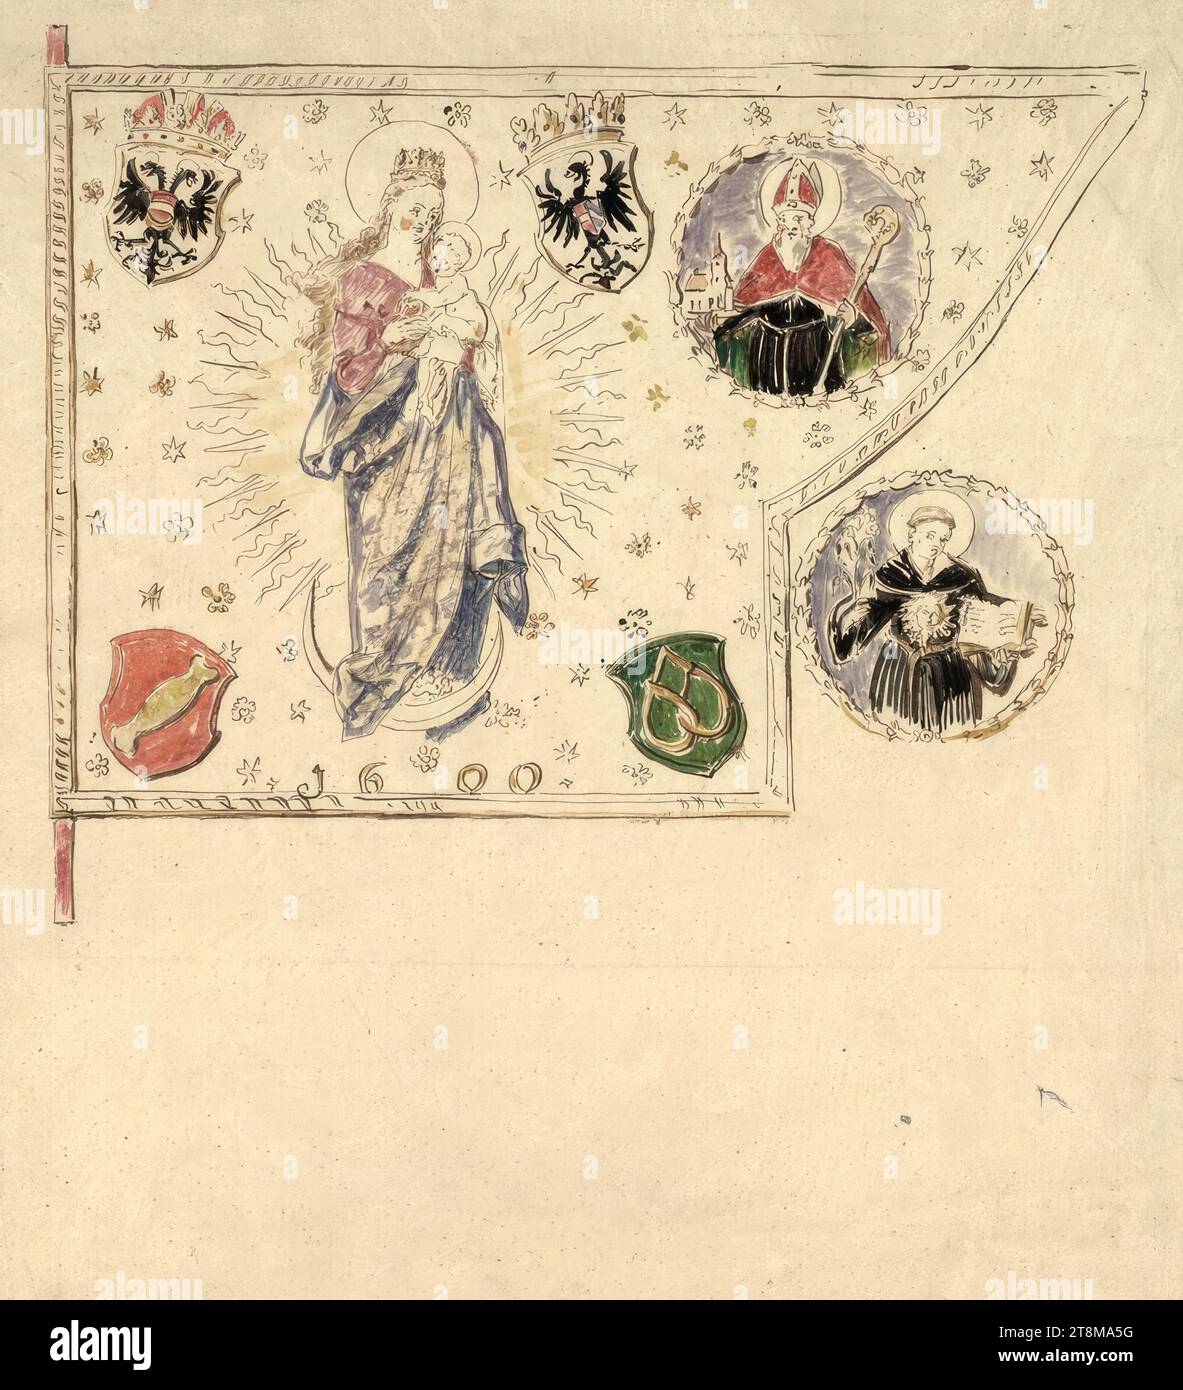 Church flag with Mary on a crescent moon, coat of arms and saints, Hans Makart (Salzburg 1840 - 1884 Vienna), drawing, brown pen, watercolor on tracing paper, 31.2 x 27.6 cm, l.l. 'JH' (collector's stamp: Julius Herz von Hertenried); r.b. 'MAKART'S ESTATE', l.l. '28428 Stock Photo